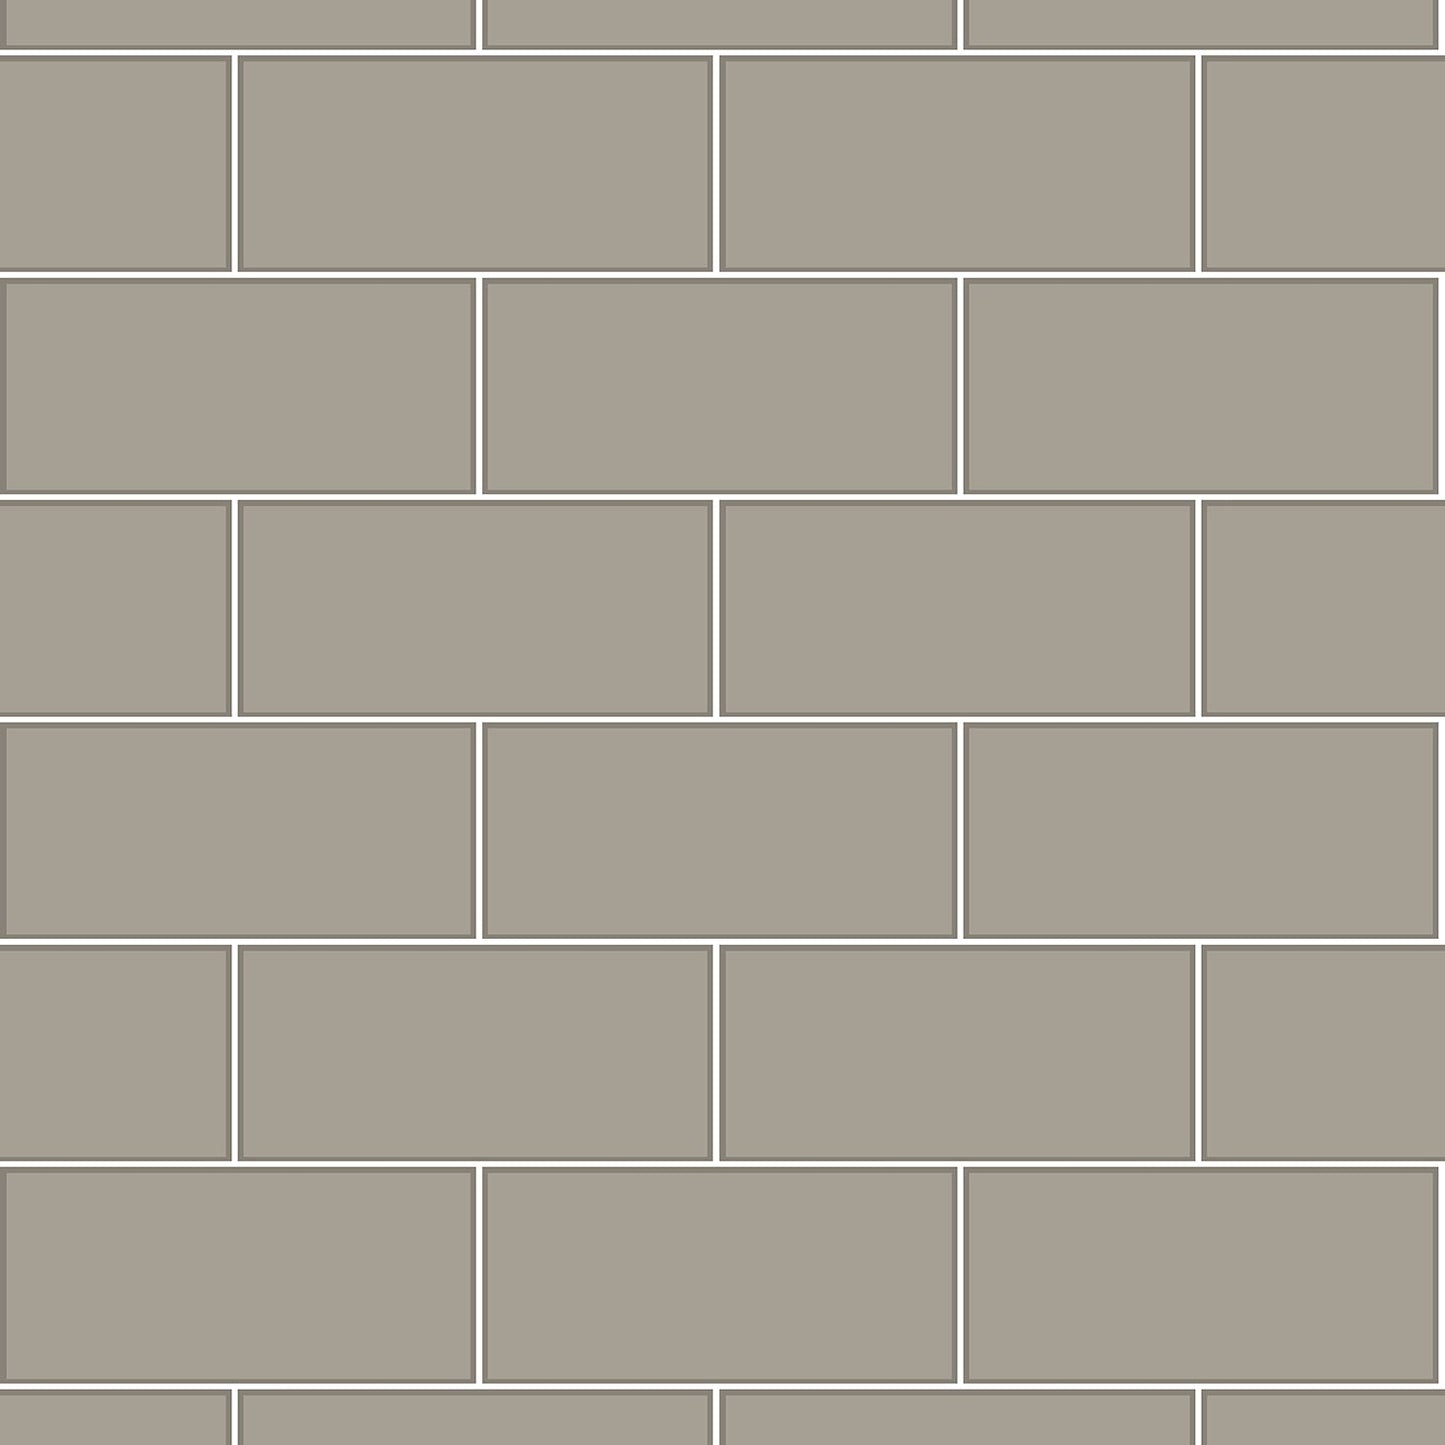 Save 2767-23753 Galley Dark Grey Subway Tile Techniques & Finishes III Brewster